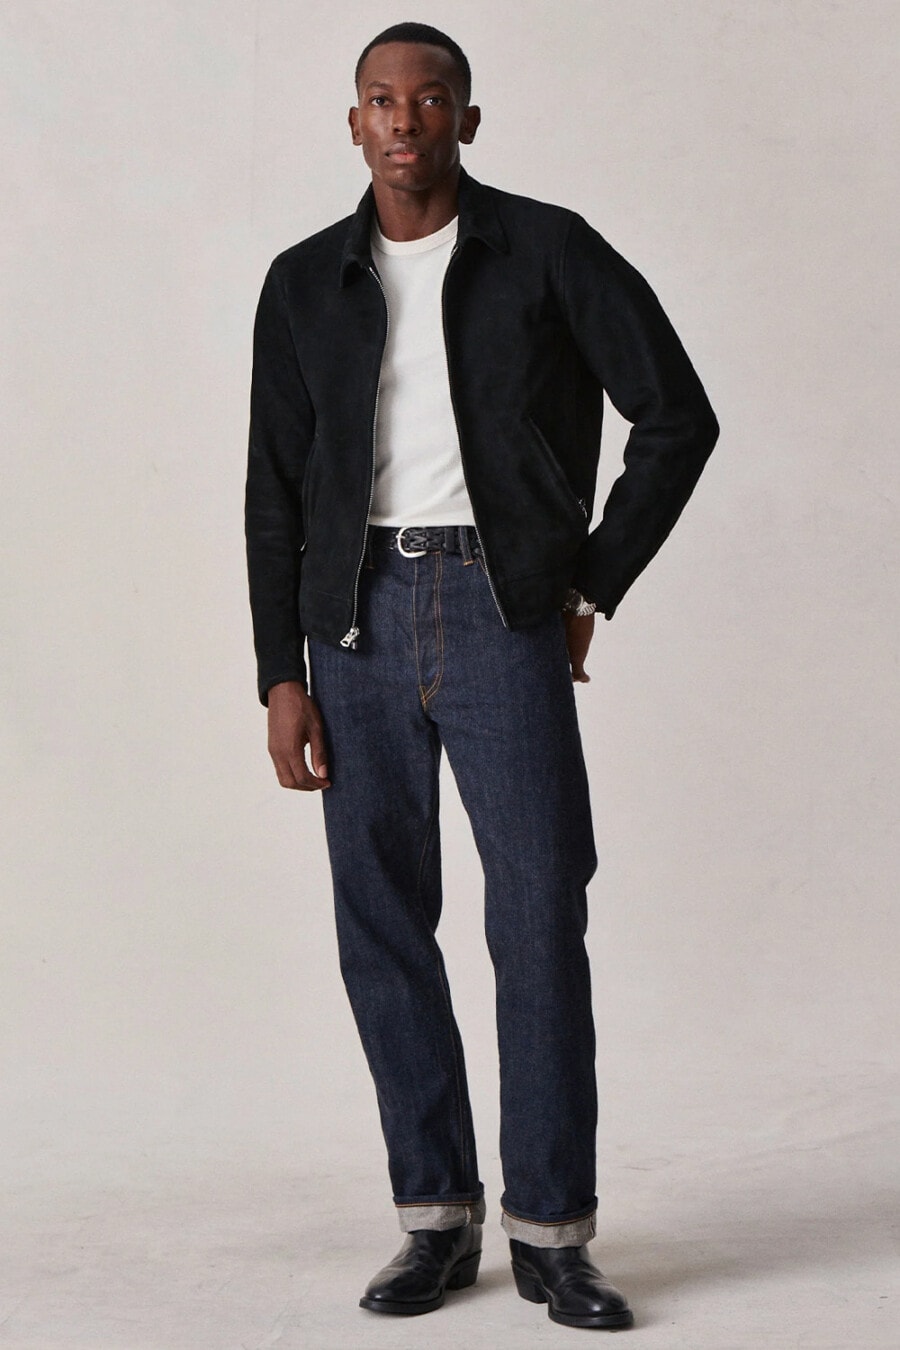 Men's raw denim selvage jeans, tucked in white T-shirt, navy suede Harrington jacket and black leather boots outfit